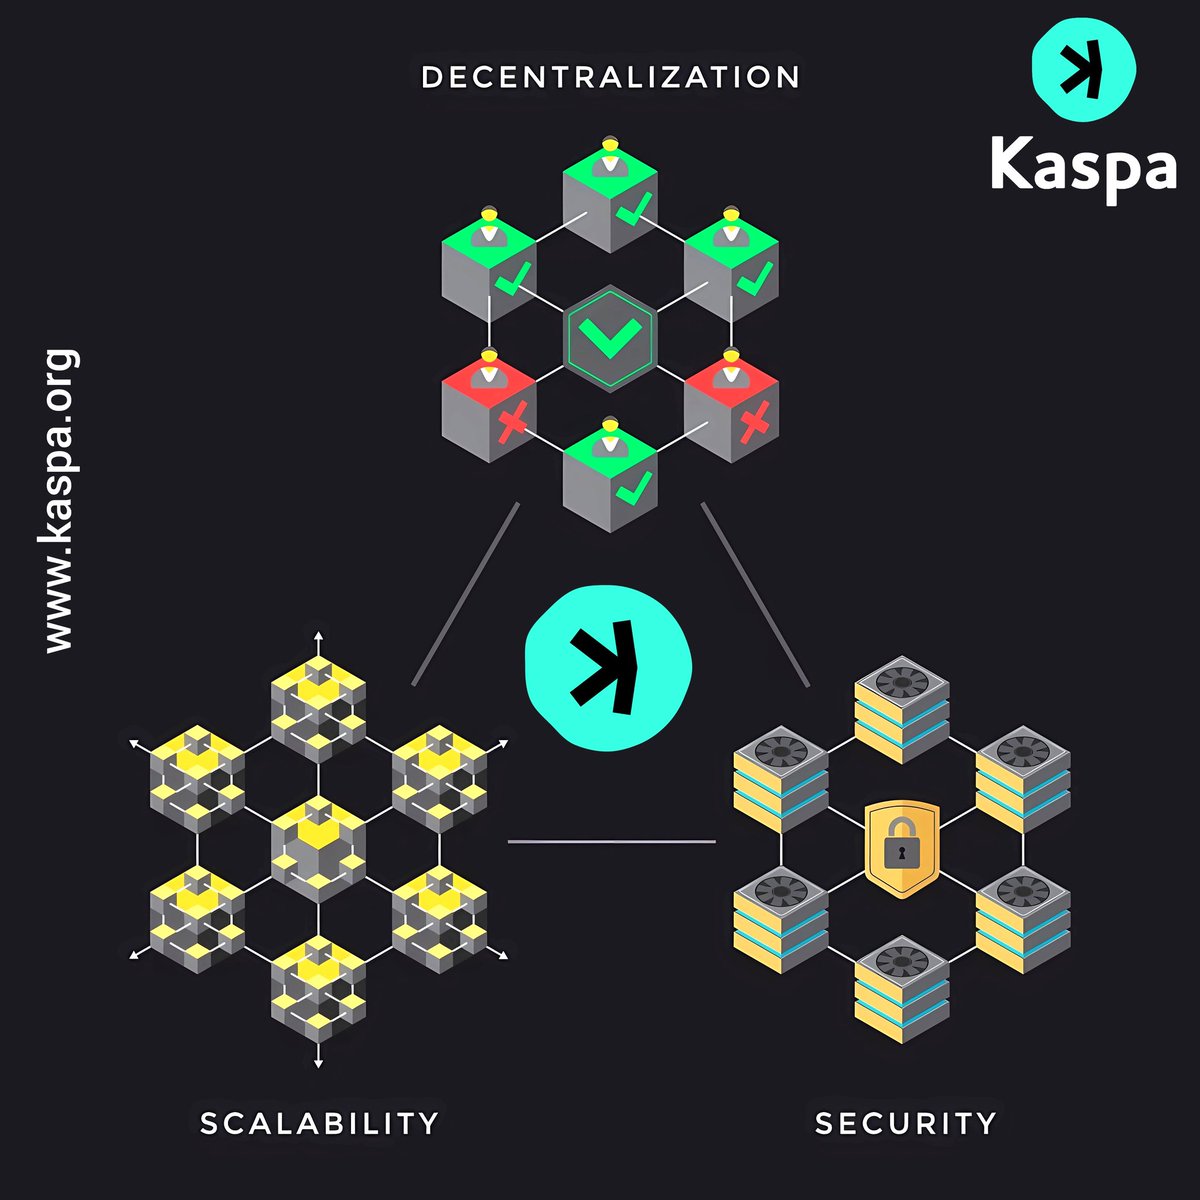 $KAS 100% Currently running 1 block per second and gearing up for 10 blocks per second. NOT a blockchain but a BlockDAG created by a contributor to the ETH white paper. @KaspaCurrency solve the crypto trilemma that standard blockchains cannot do.